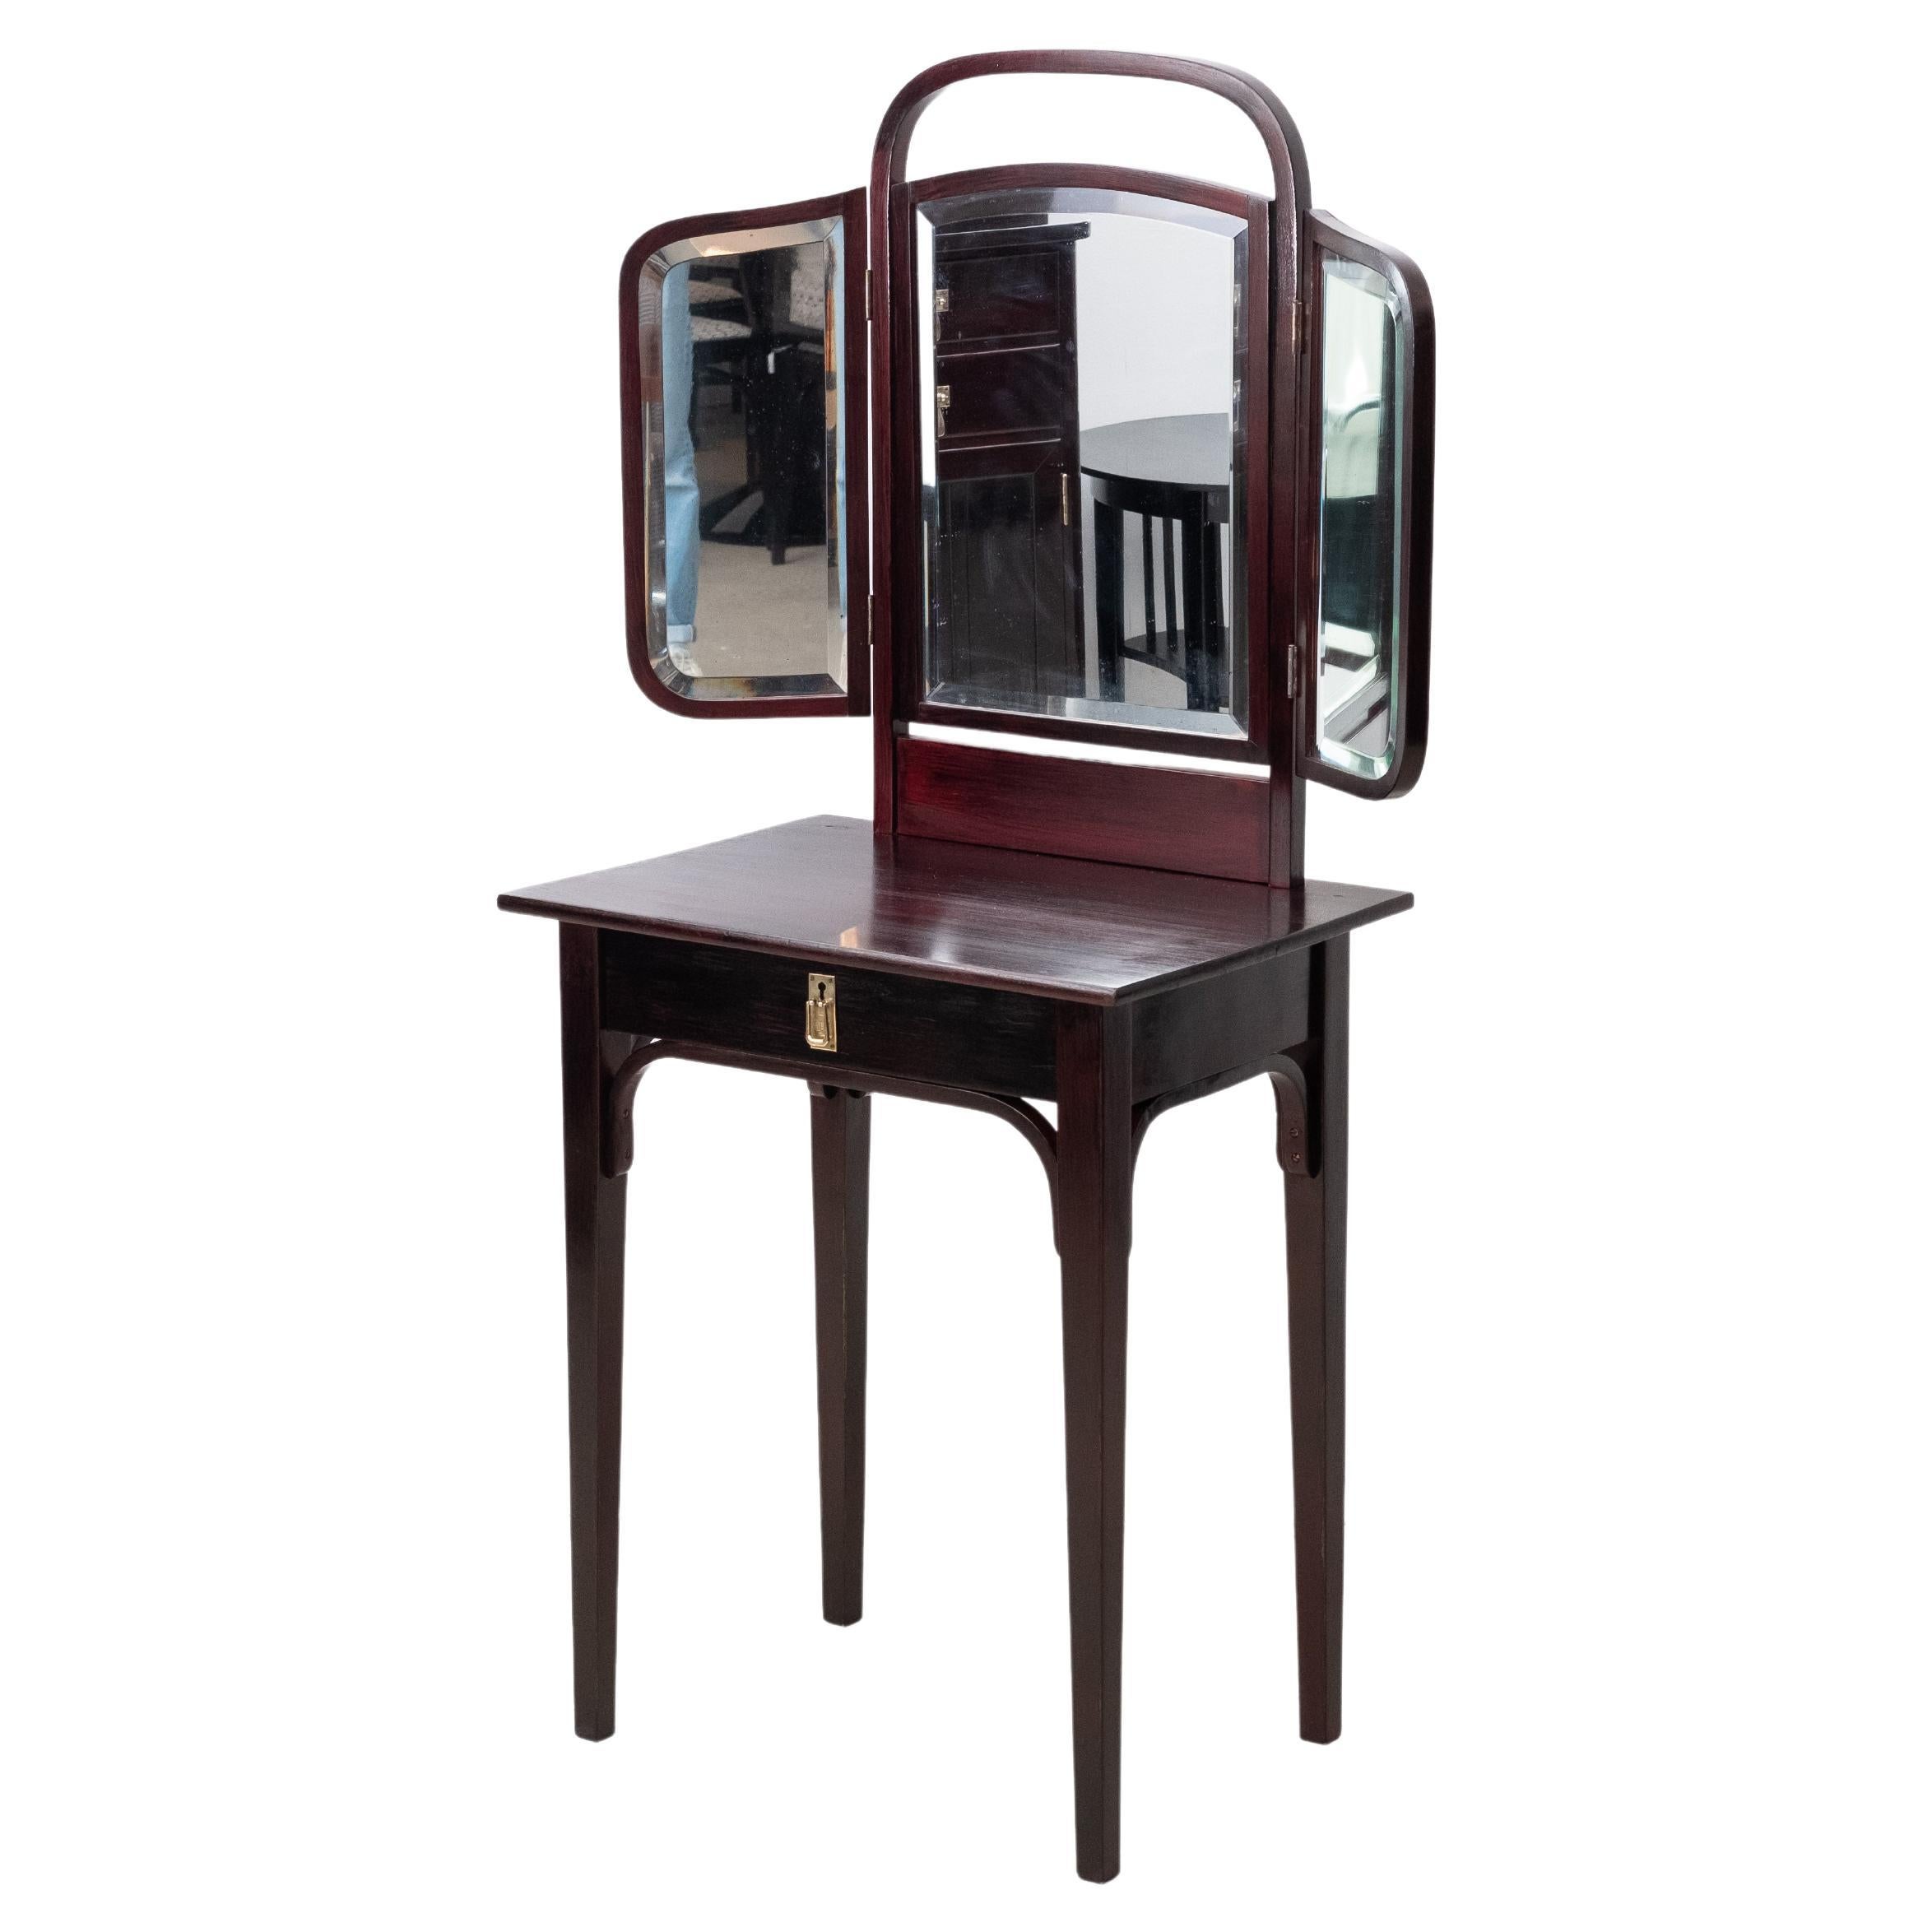 Art Nouveau Dressingtable from Thonet Brothers, Model 23045 (Vienna, 1910) For Sale